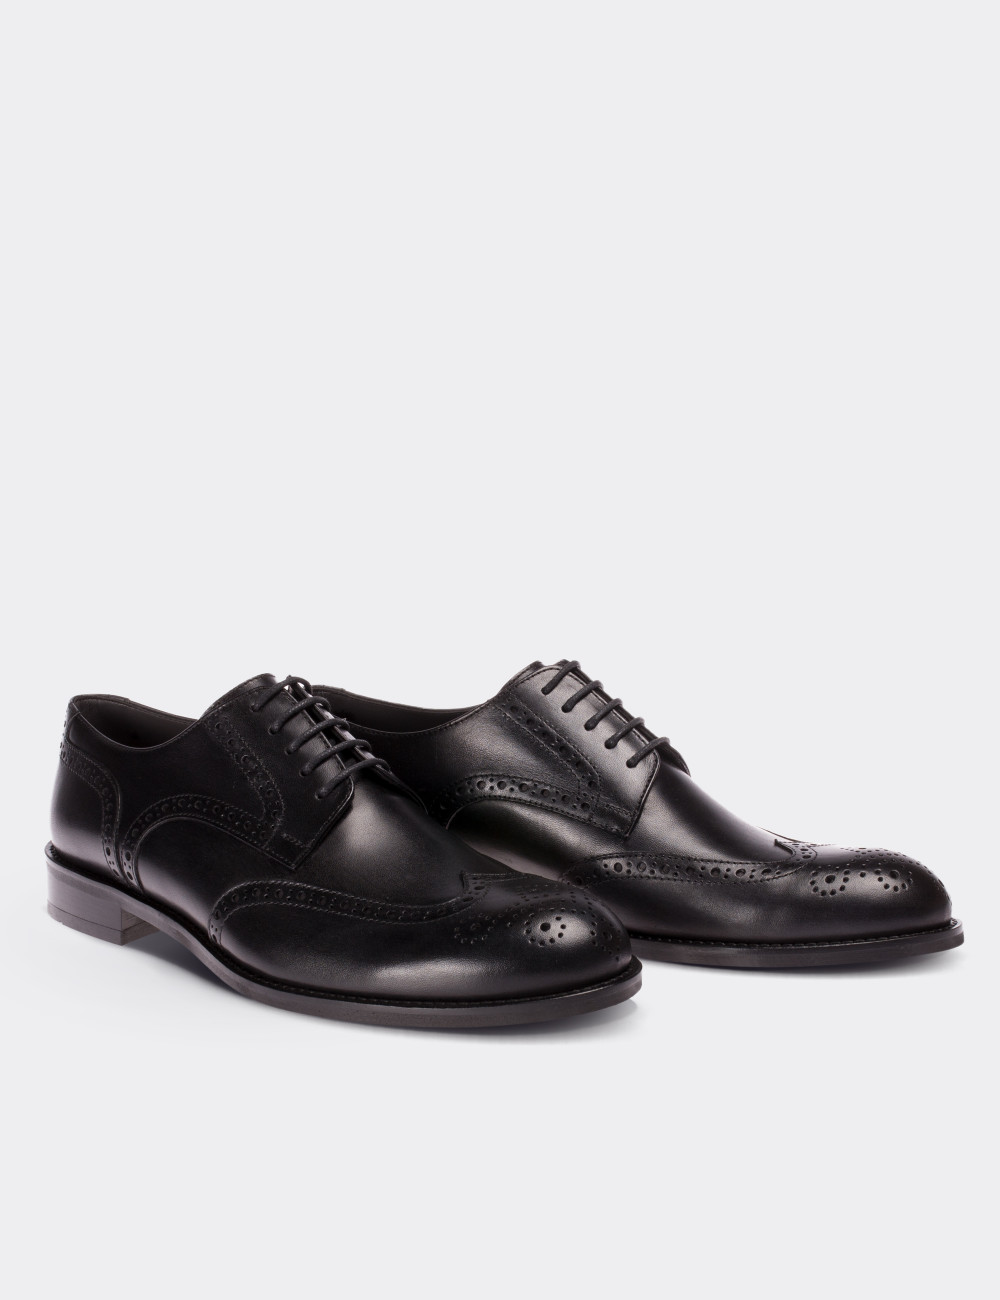 Black Leather Oxford Shoes - Deery